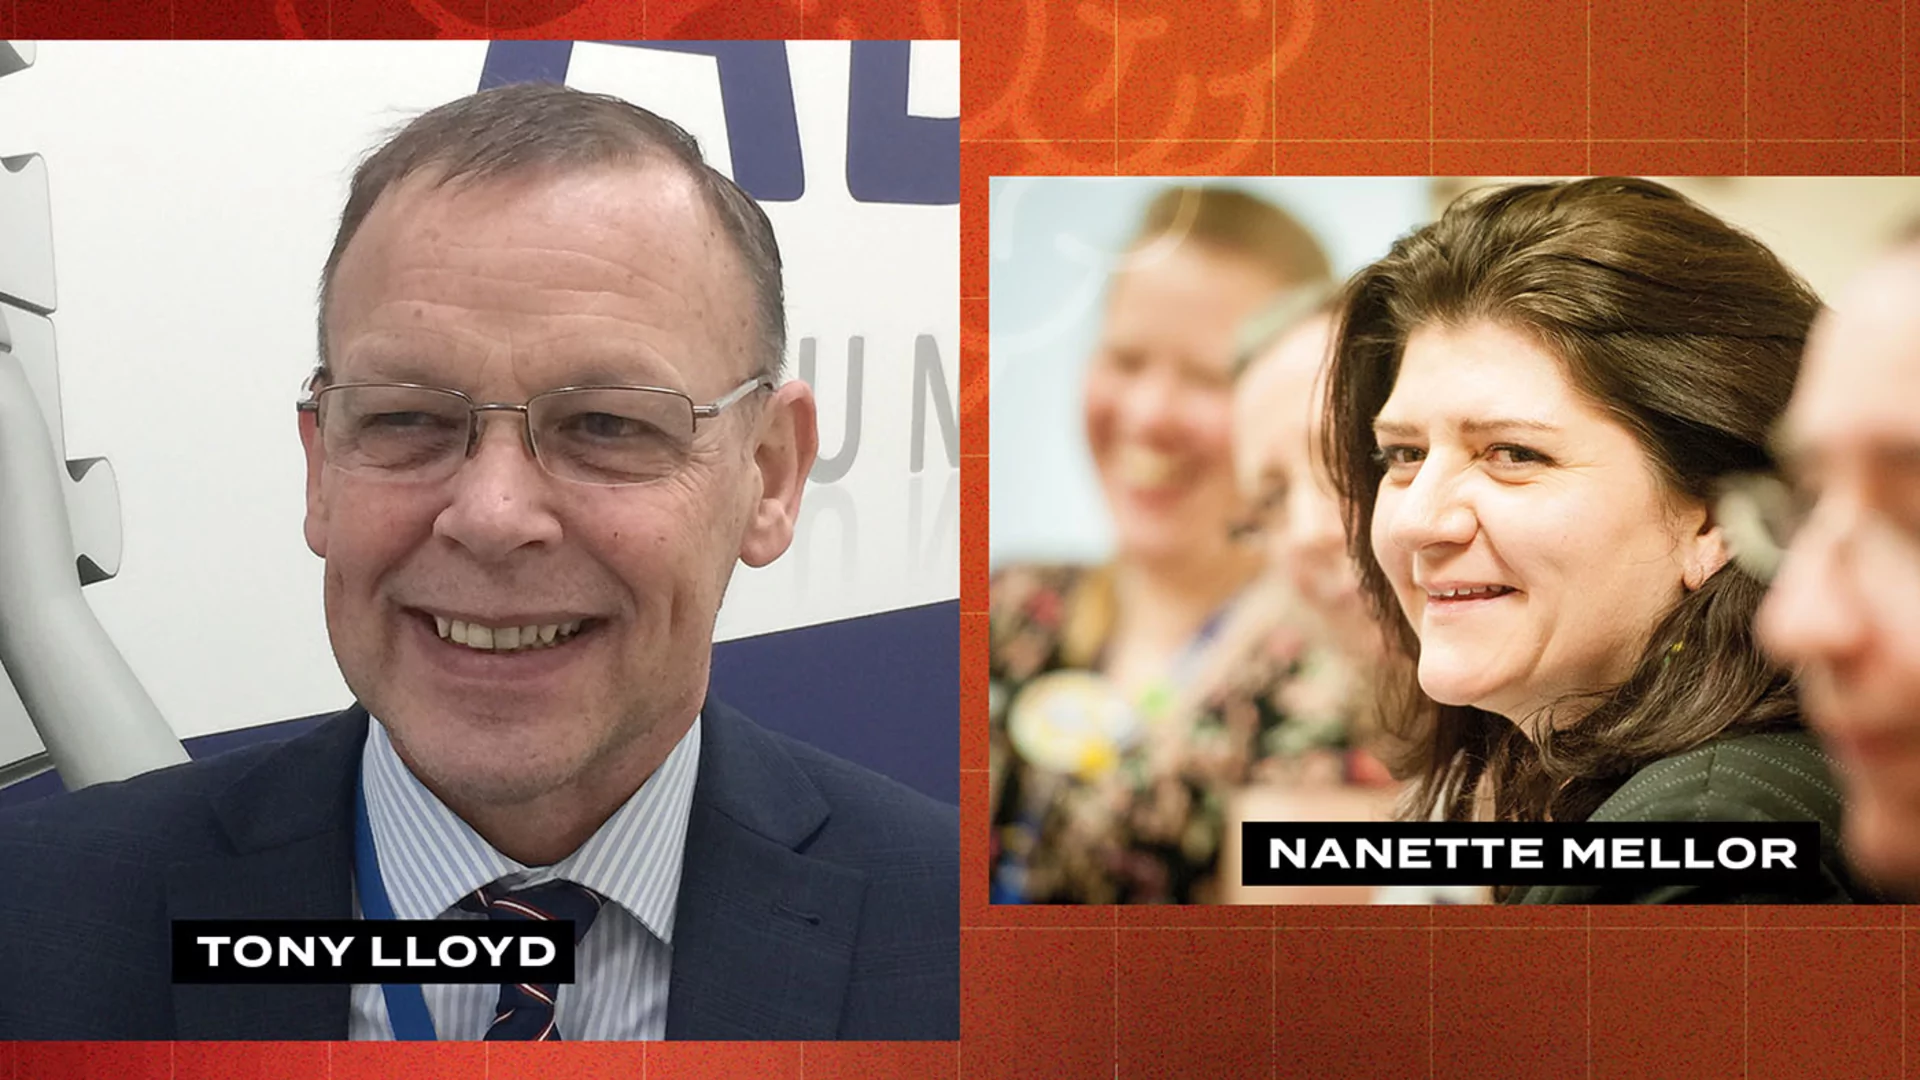 Two pictures side by side on an orange background. On the left is Tony Lloyd in a suit, on the right is Nanette Mellor sat smiling in an audience